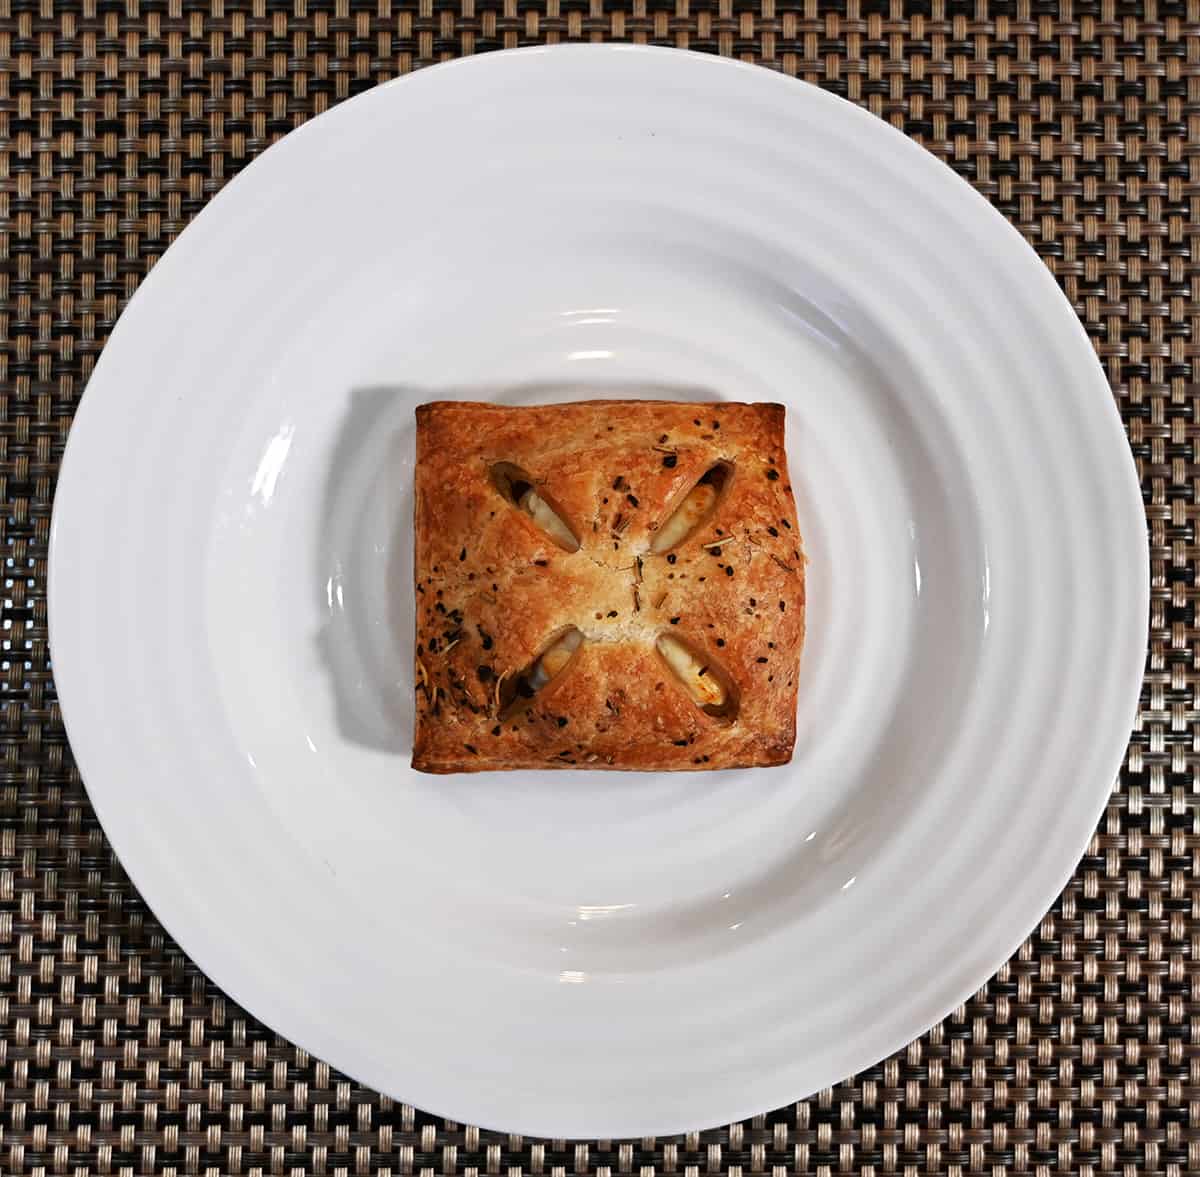 Top down image of one puff pastry baked and served on a white plate.